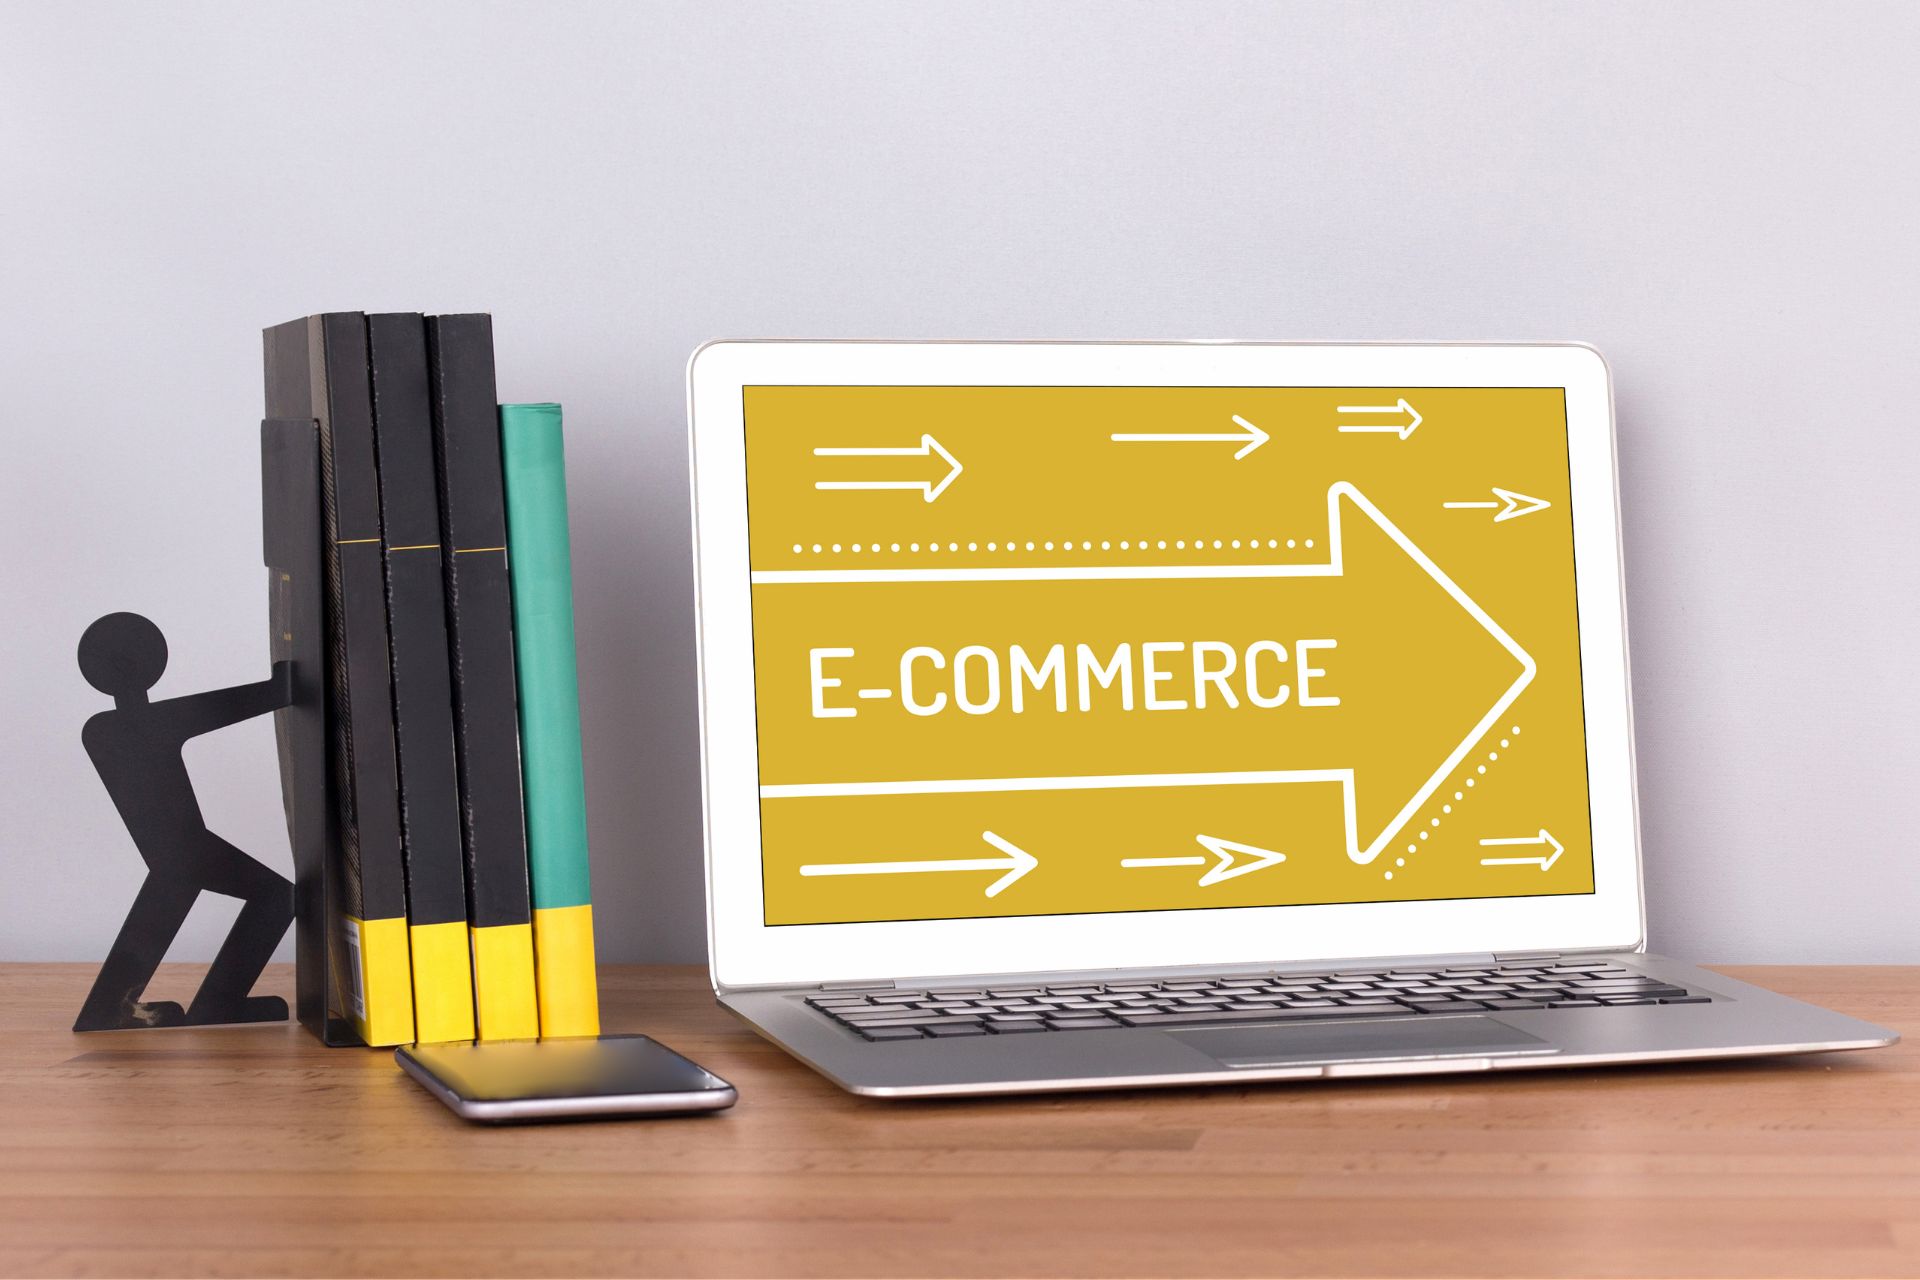 Ecommerce, The present and the future of retail